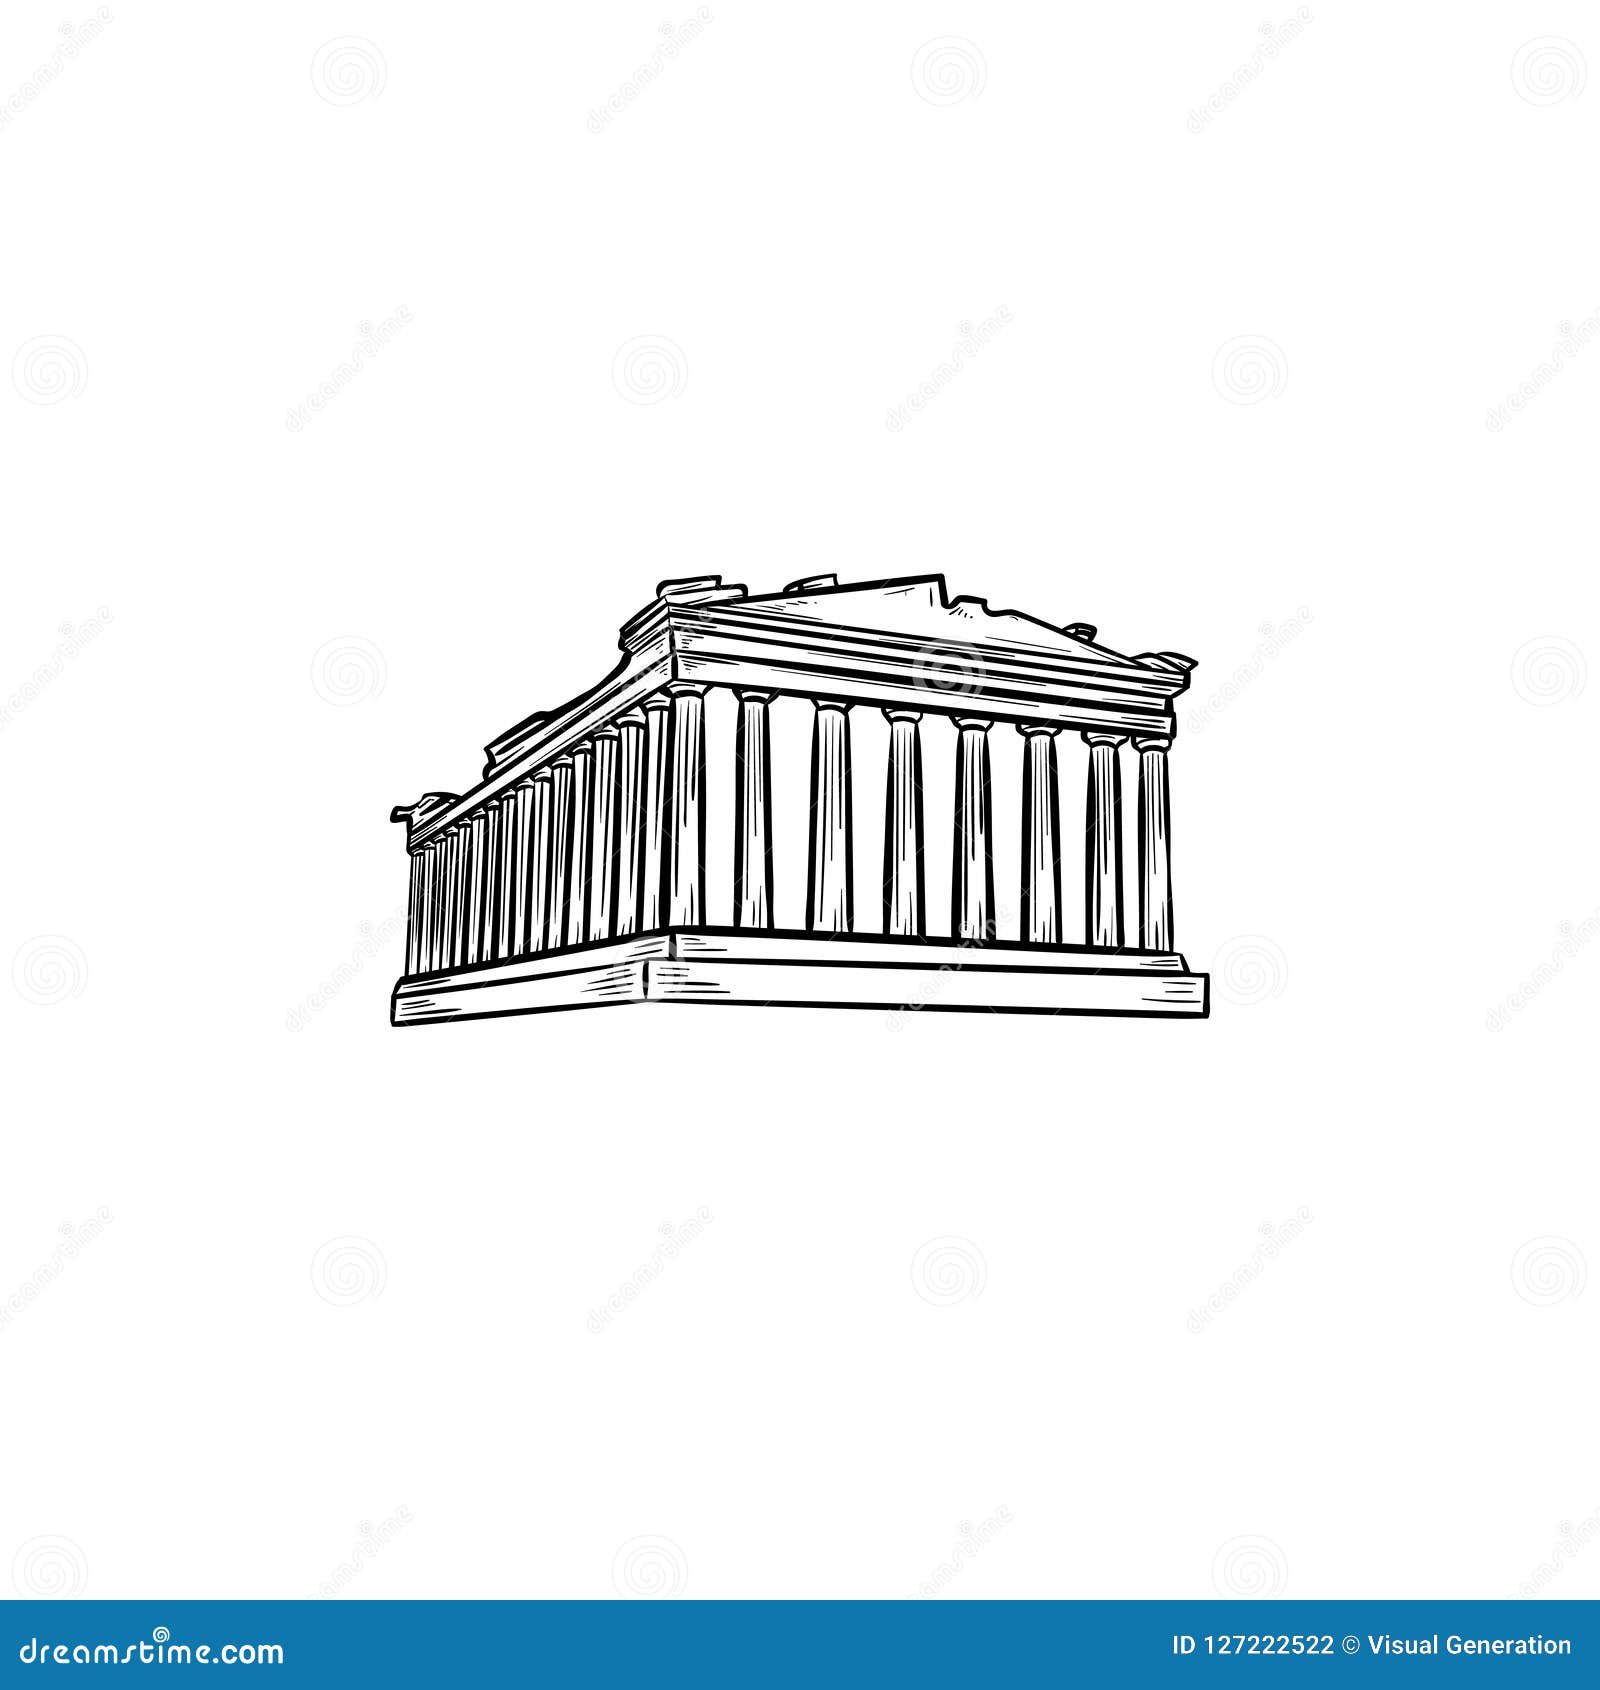 acropolis in athens hand drawn outline doodle icon.